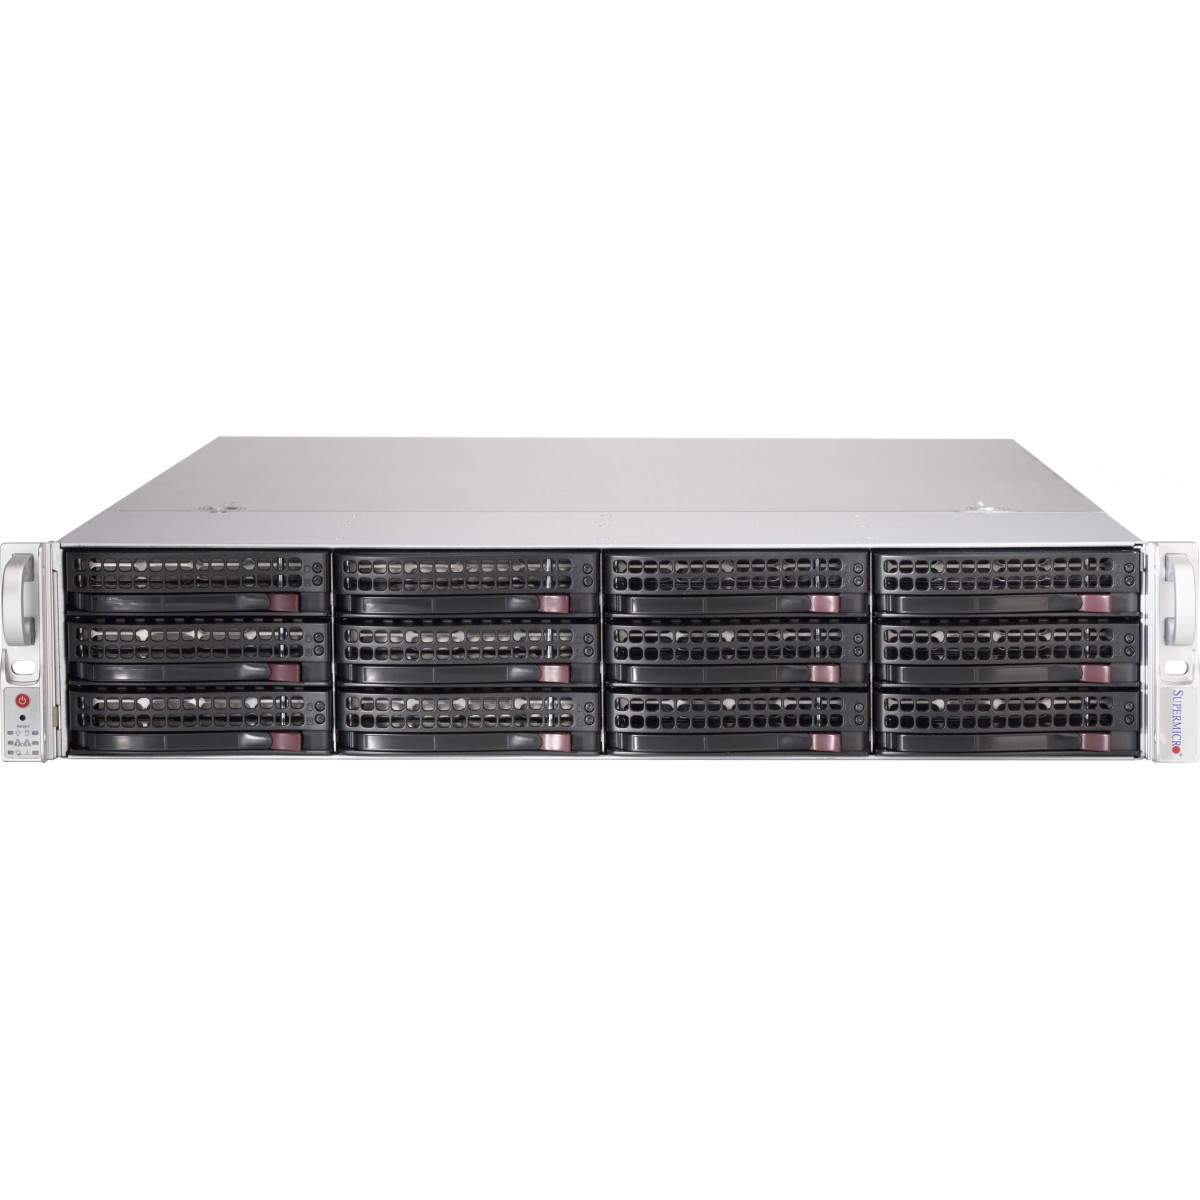 Supermicro SuperChassis 826BE1C-R609JBOD